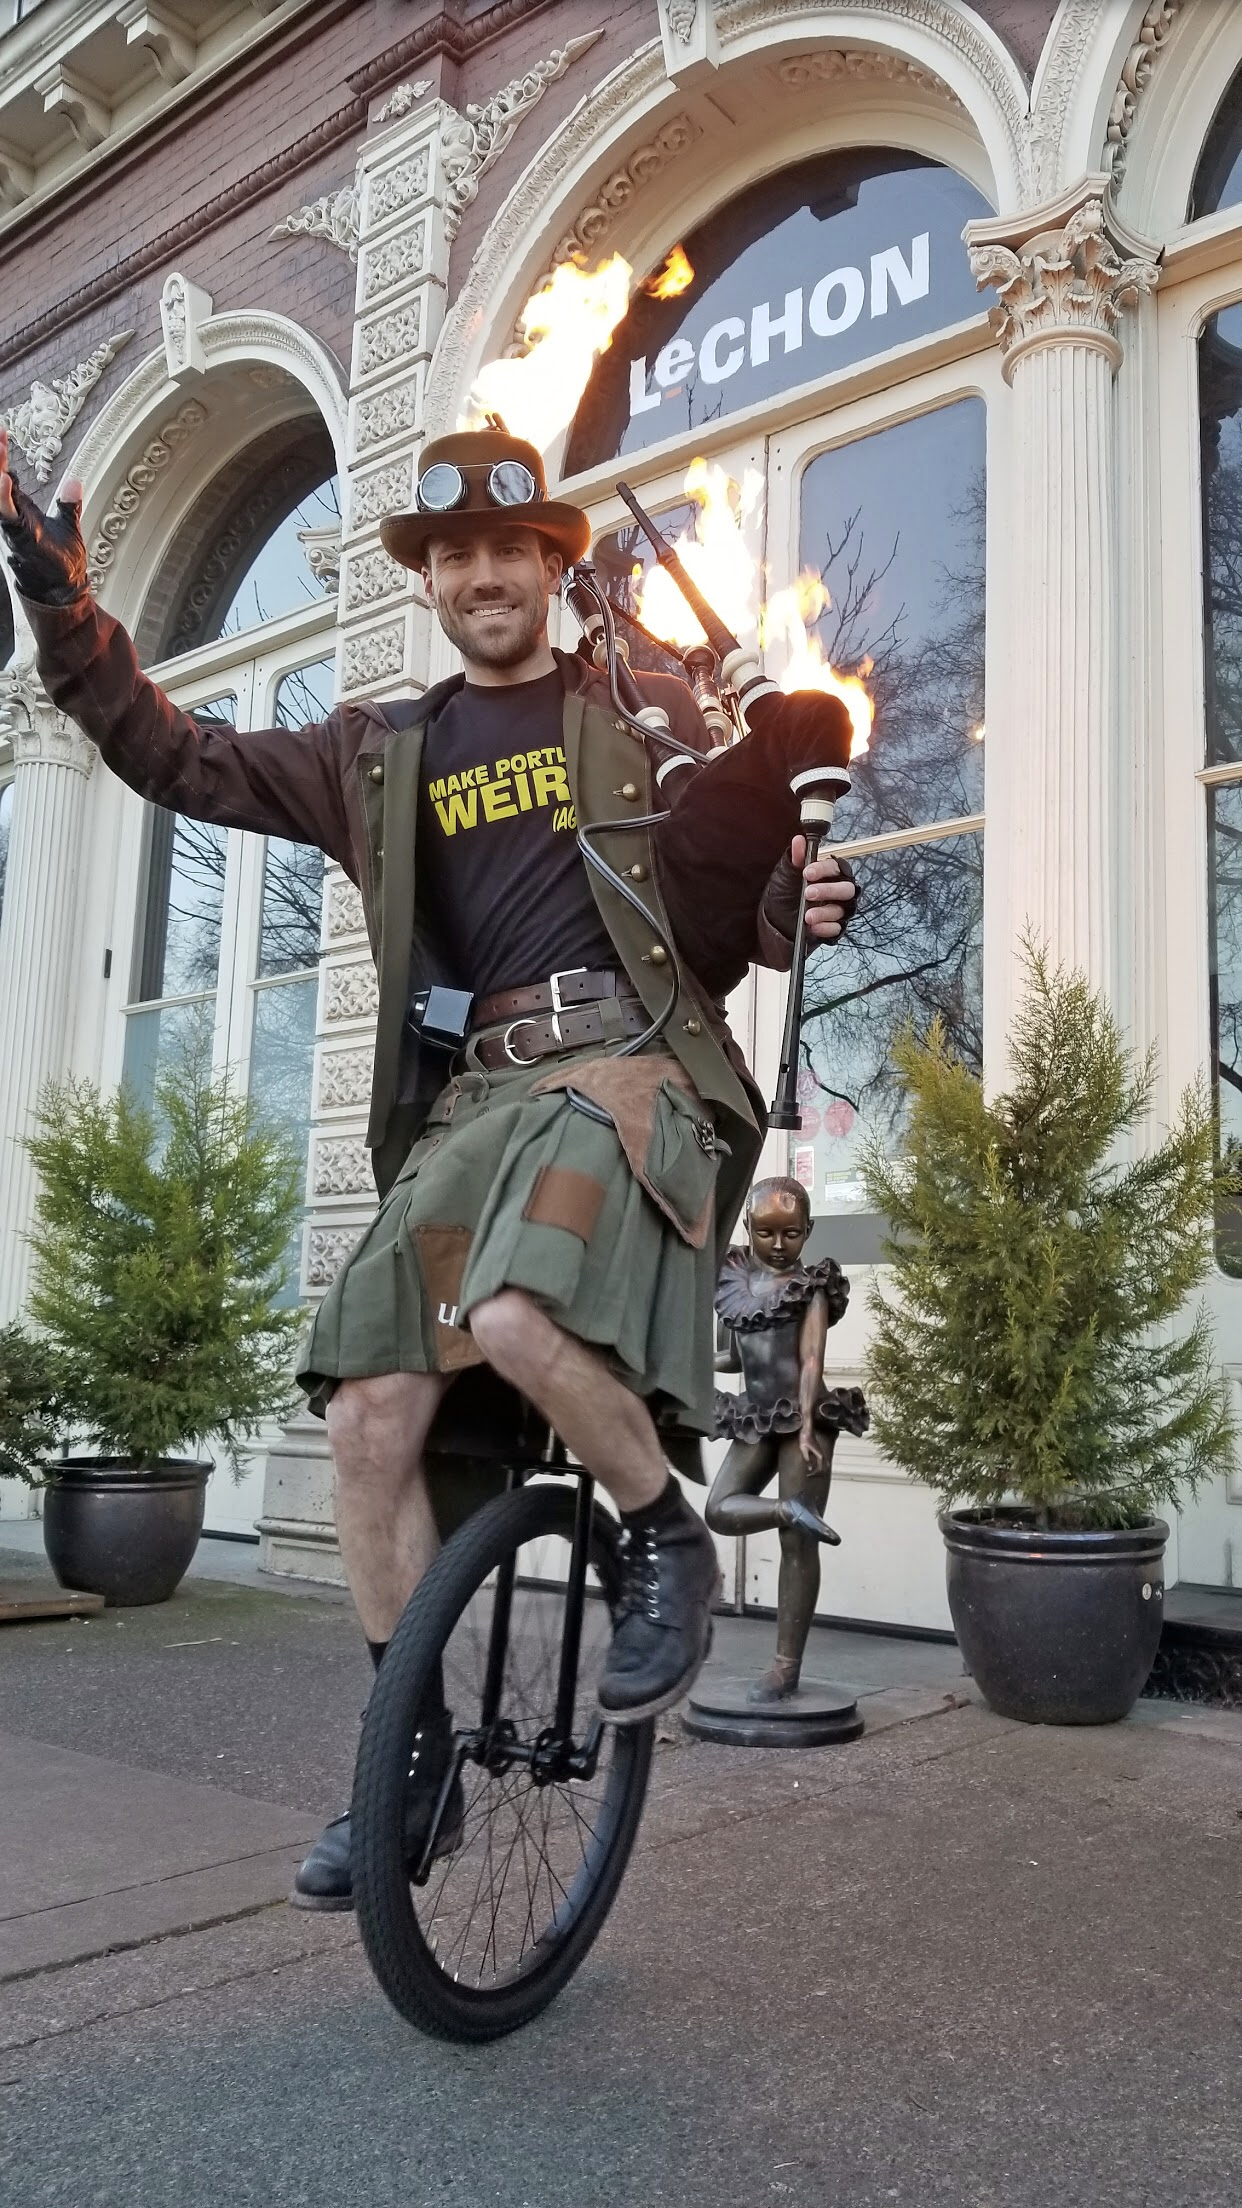 The Unipiper makes his way through Downtown Portland.